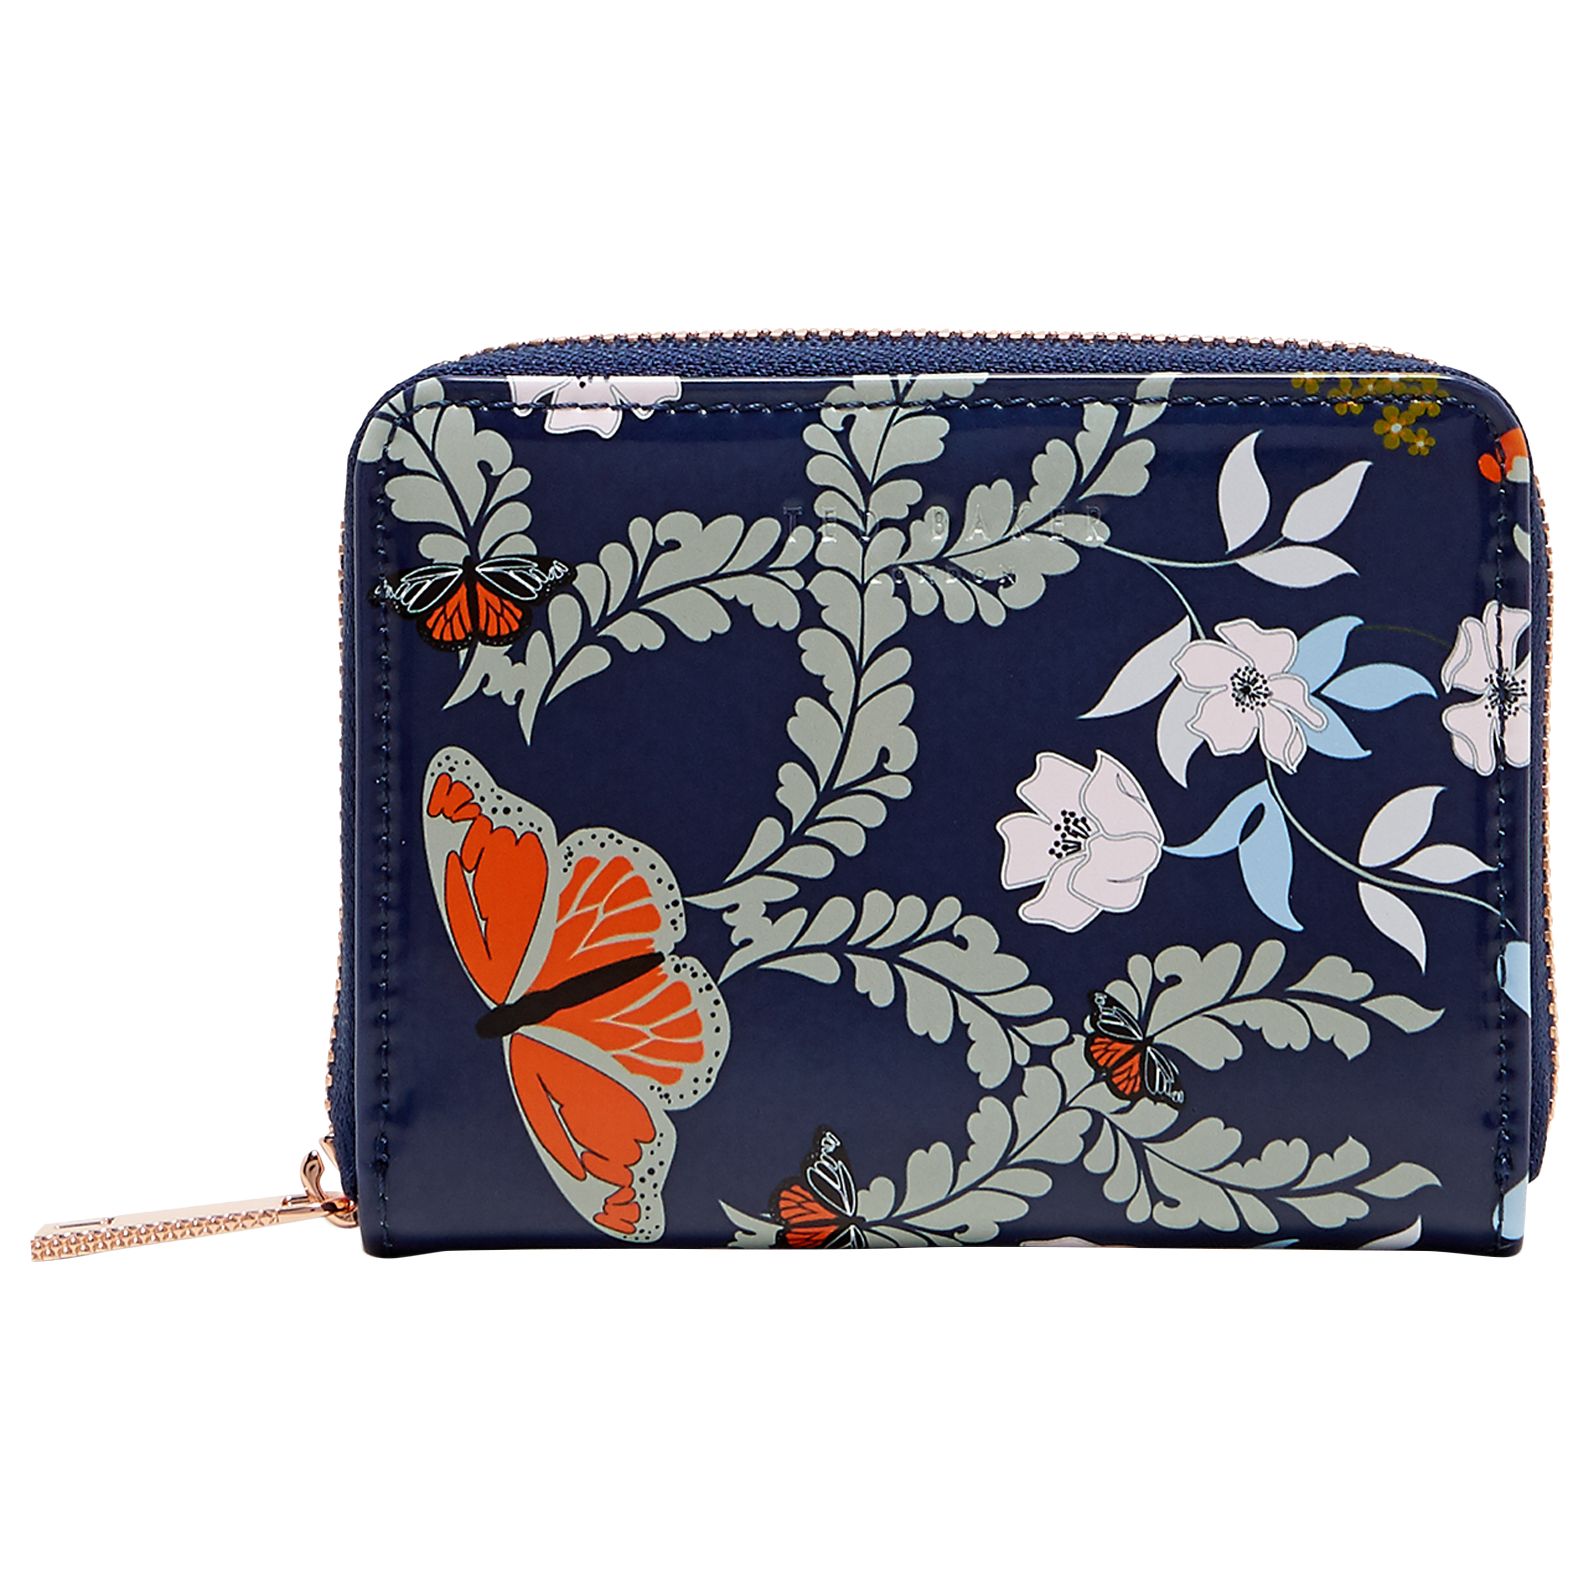 Ted Baker Peeta Kyoto Gardens Leather Coin Purse, Mid Blue